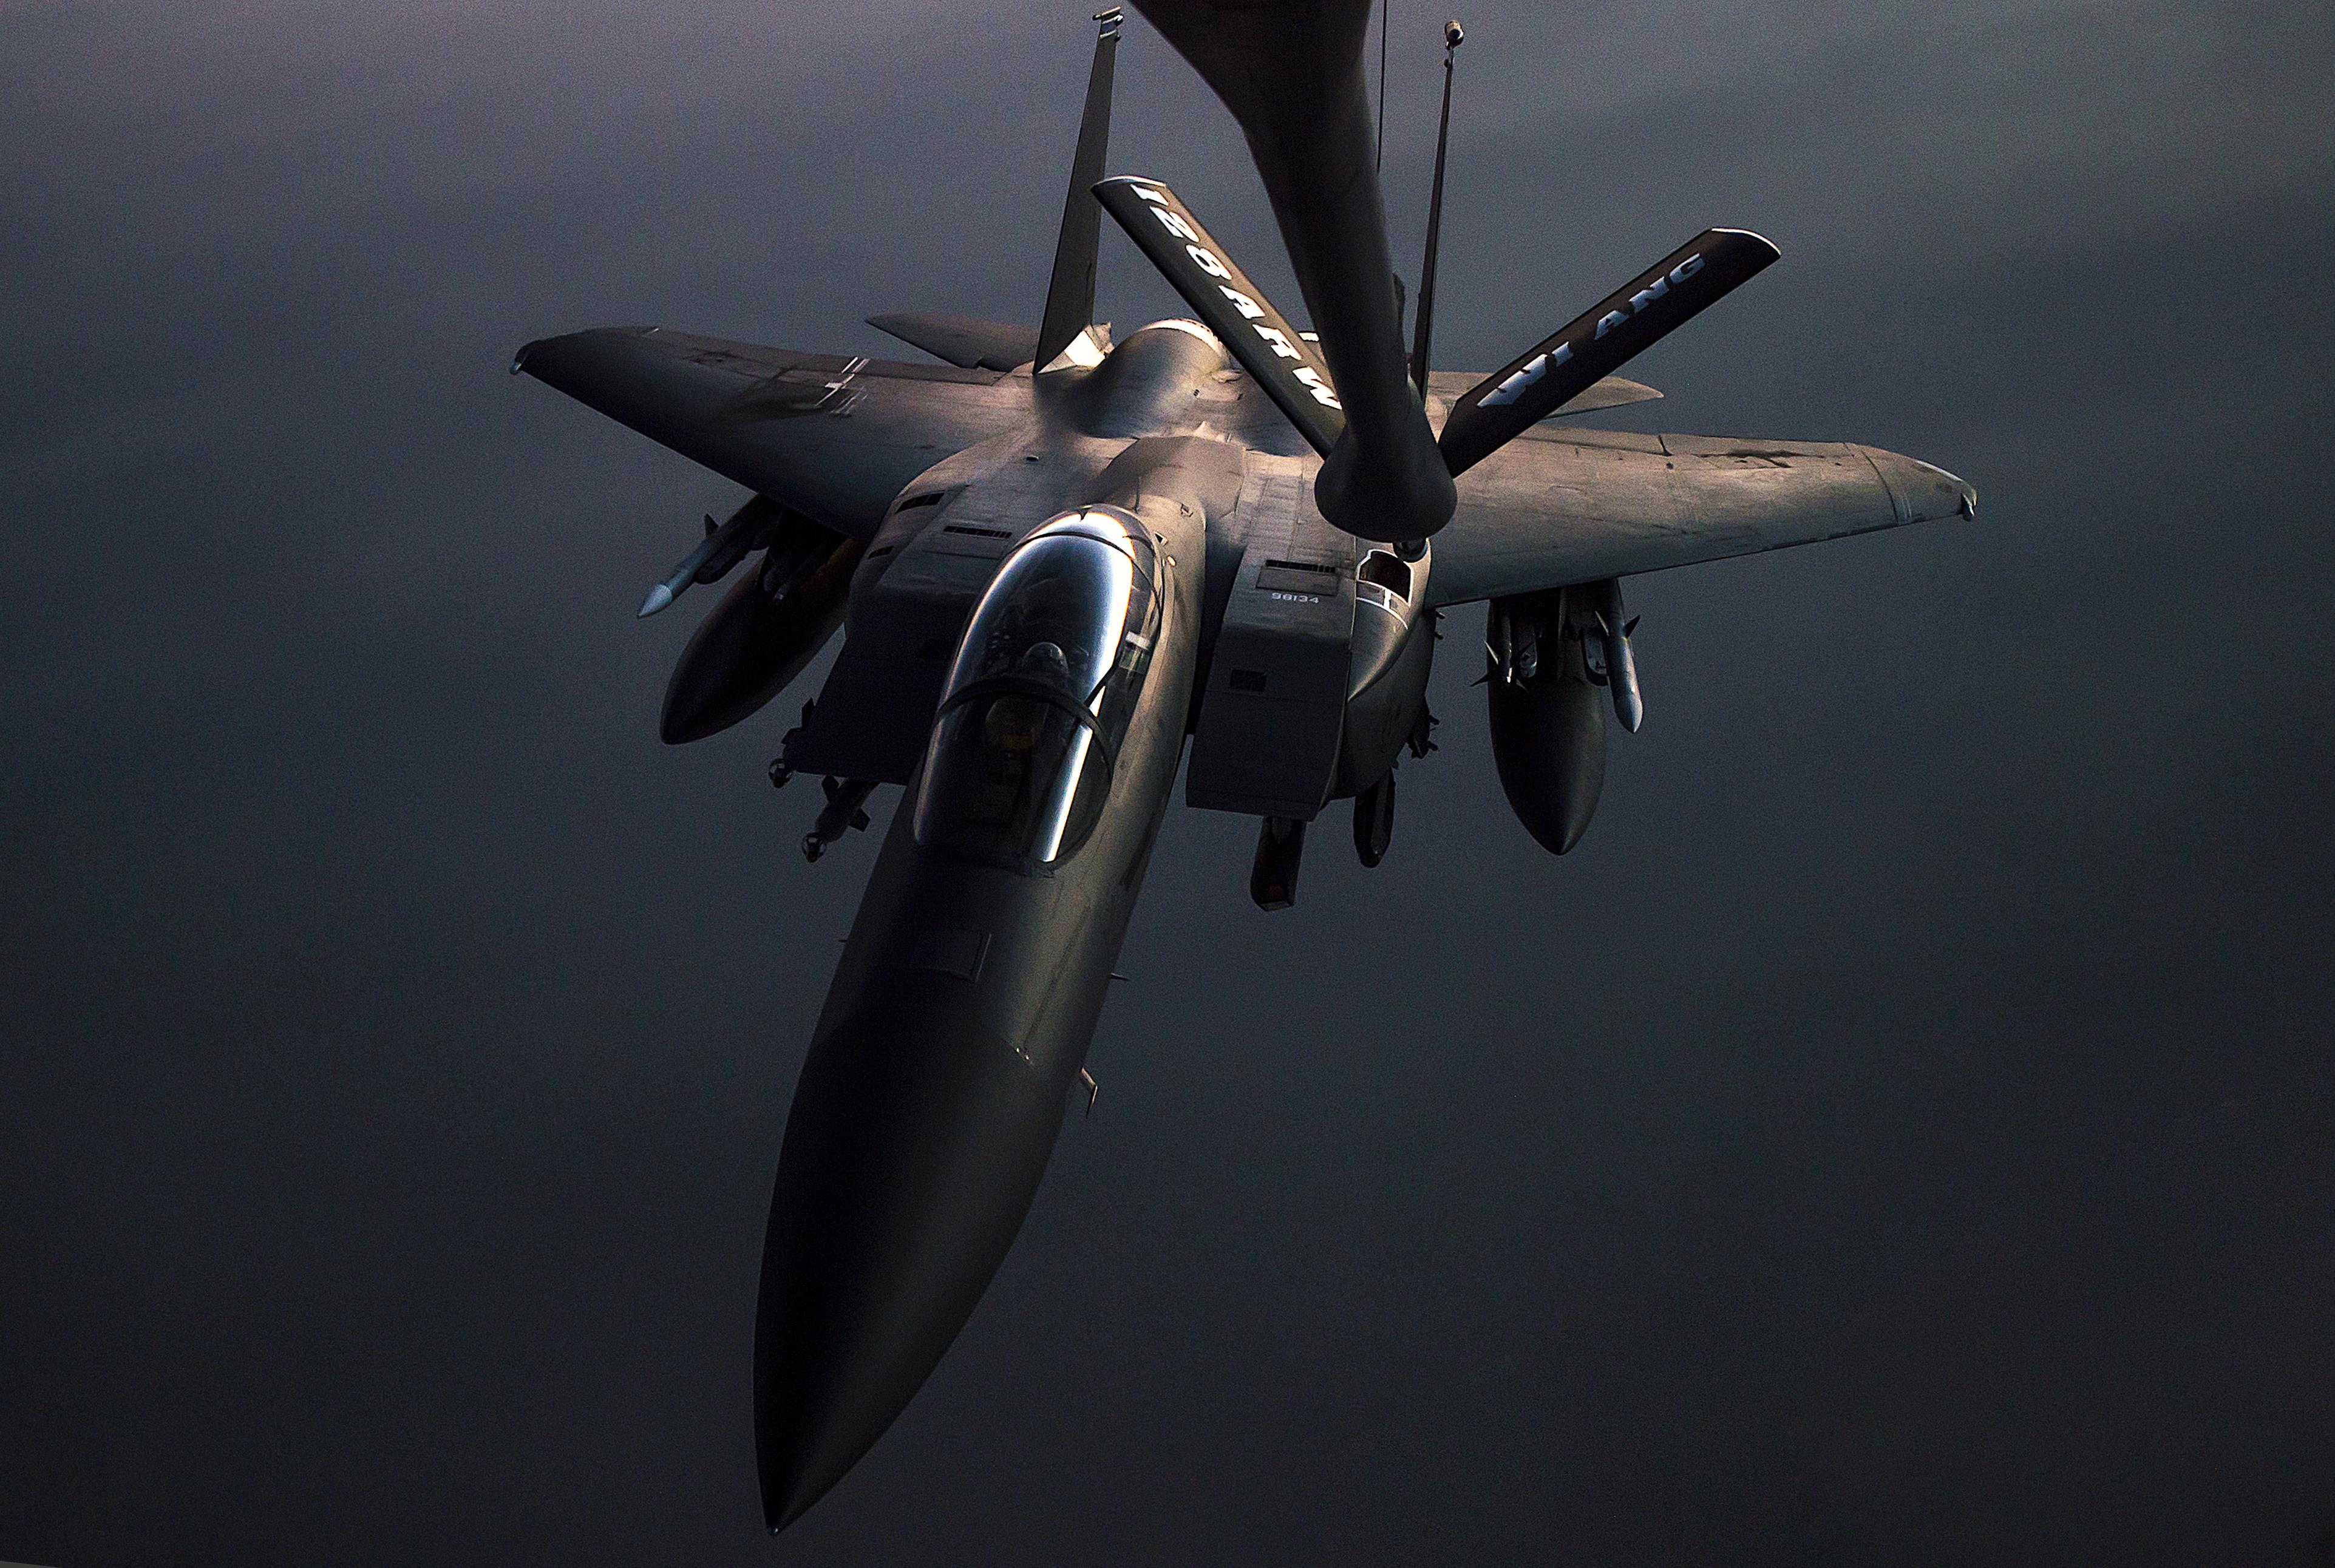 An F-15E Strike Eagle arrives to receive fuel from a 340th Expeditionary Air Refueling Squadron KC-135 Stratotanker during a flight in support of Operation Inherent Resolve May 23, 2017. US Air Force Air Force 